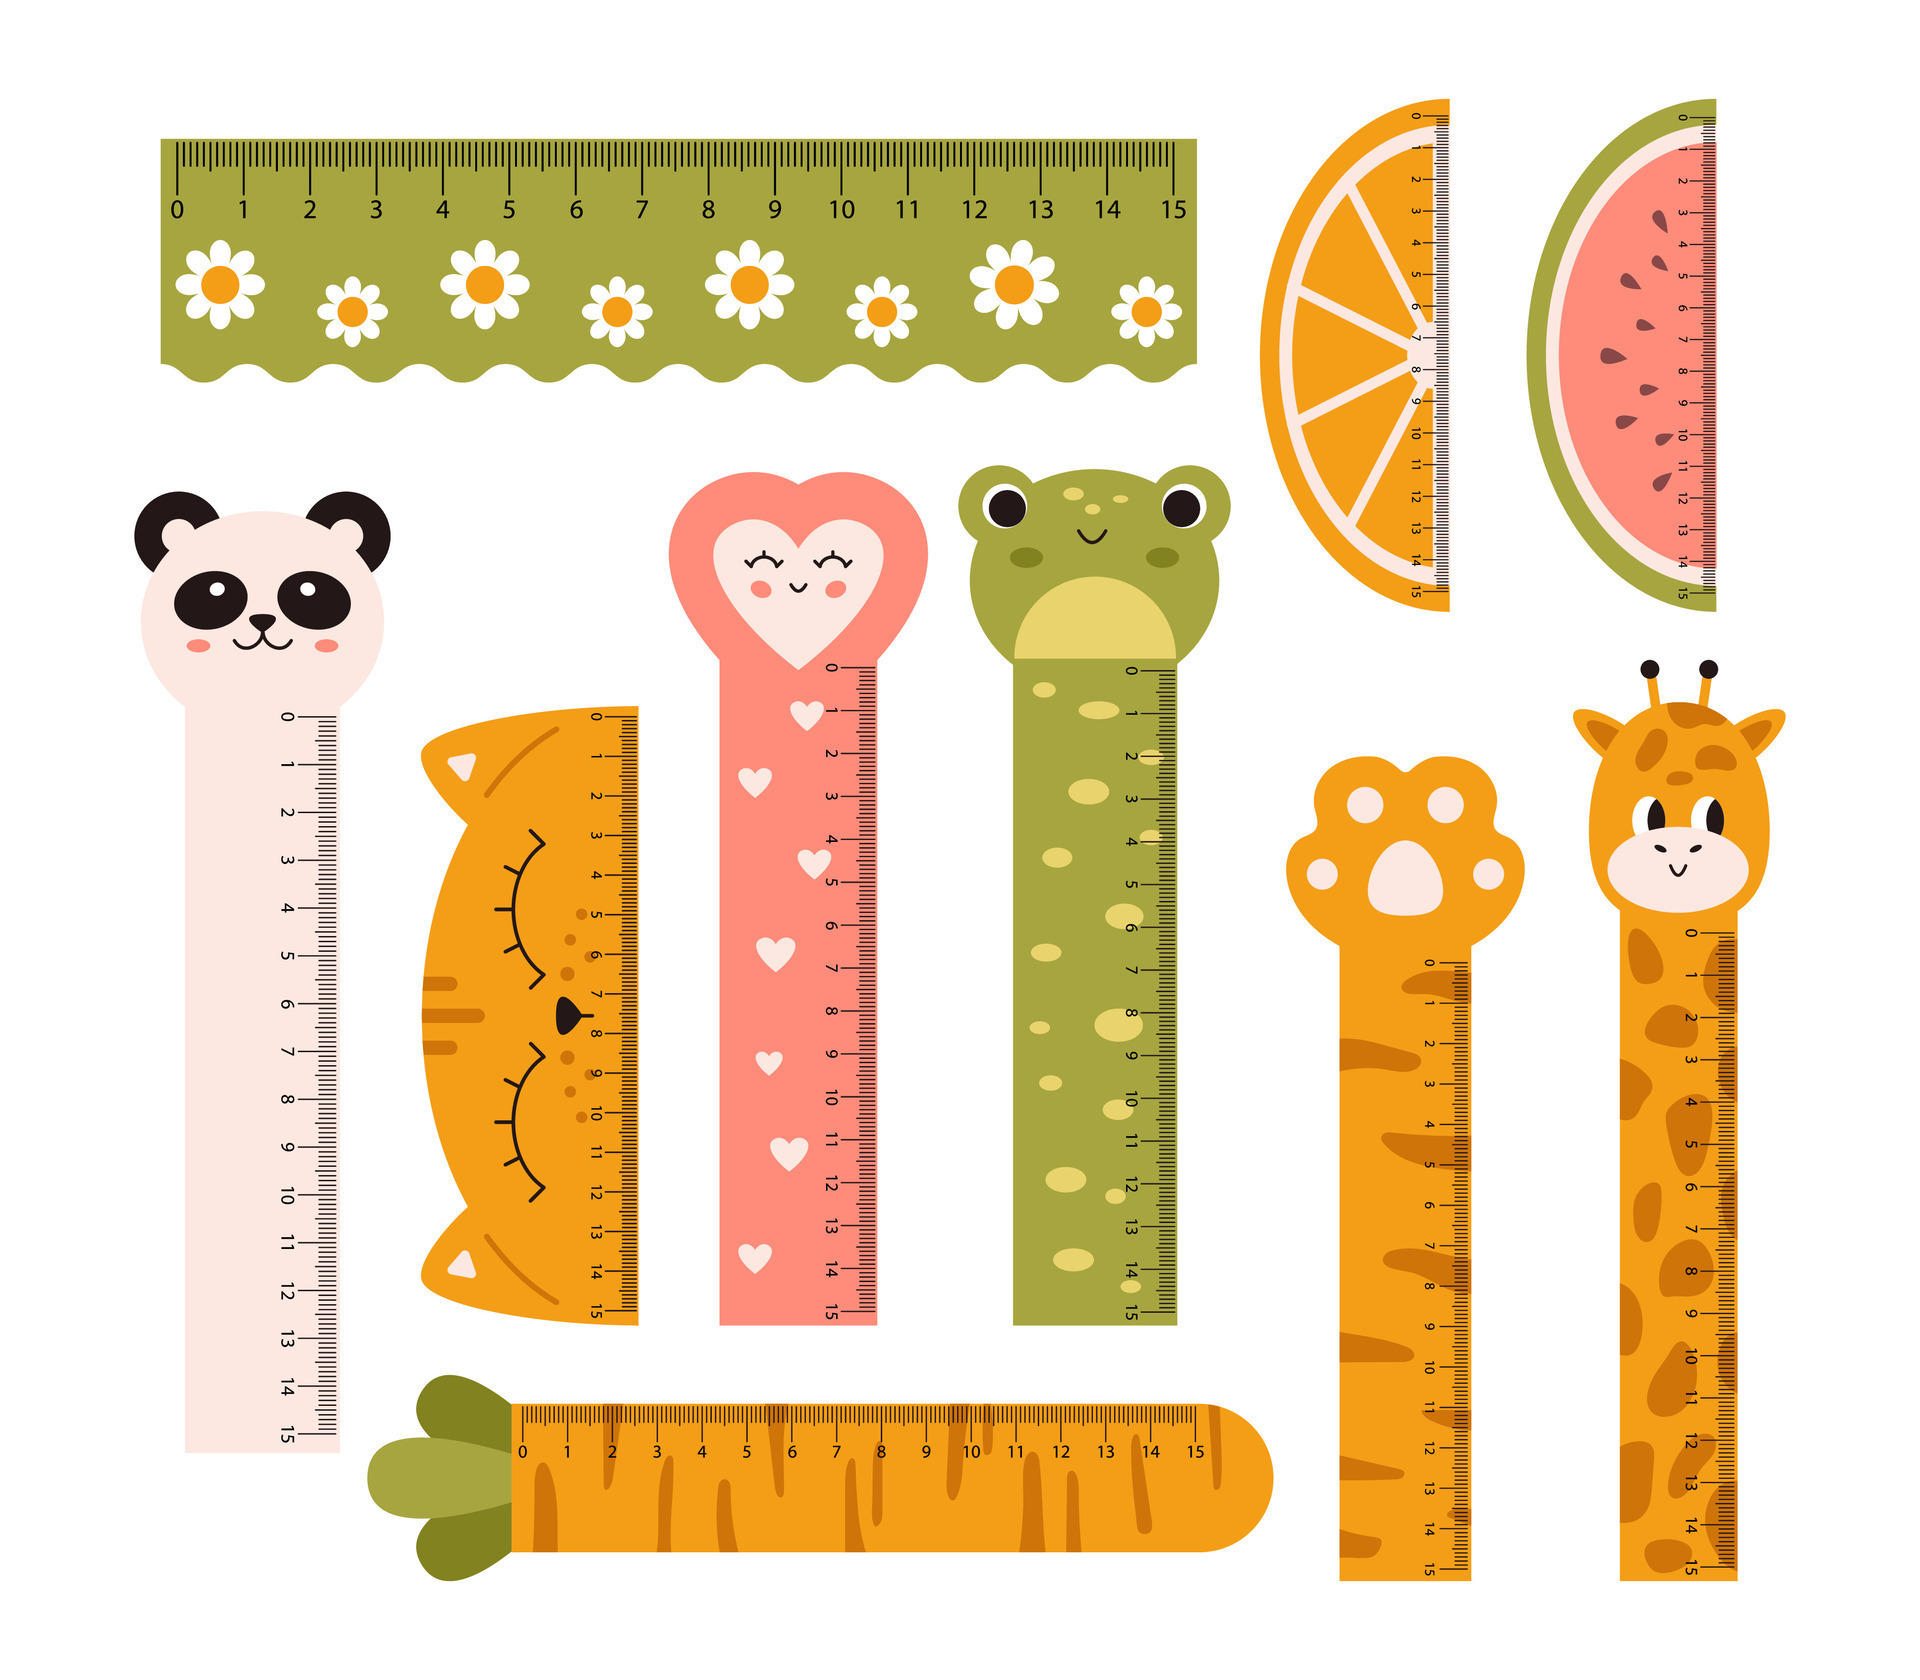 https://static.vecteezy.com/system/resources/previews/026/556/275/original/set-with-cute-measuring-rulers-kawaii-collection-in-flat-design-centimeter-scales-funny-animals-and-fruits-on-rulers-measuring-tools-vector.jpg